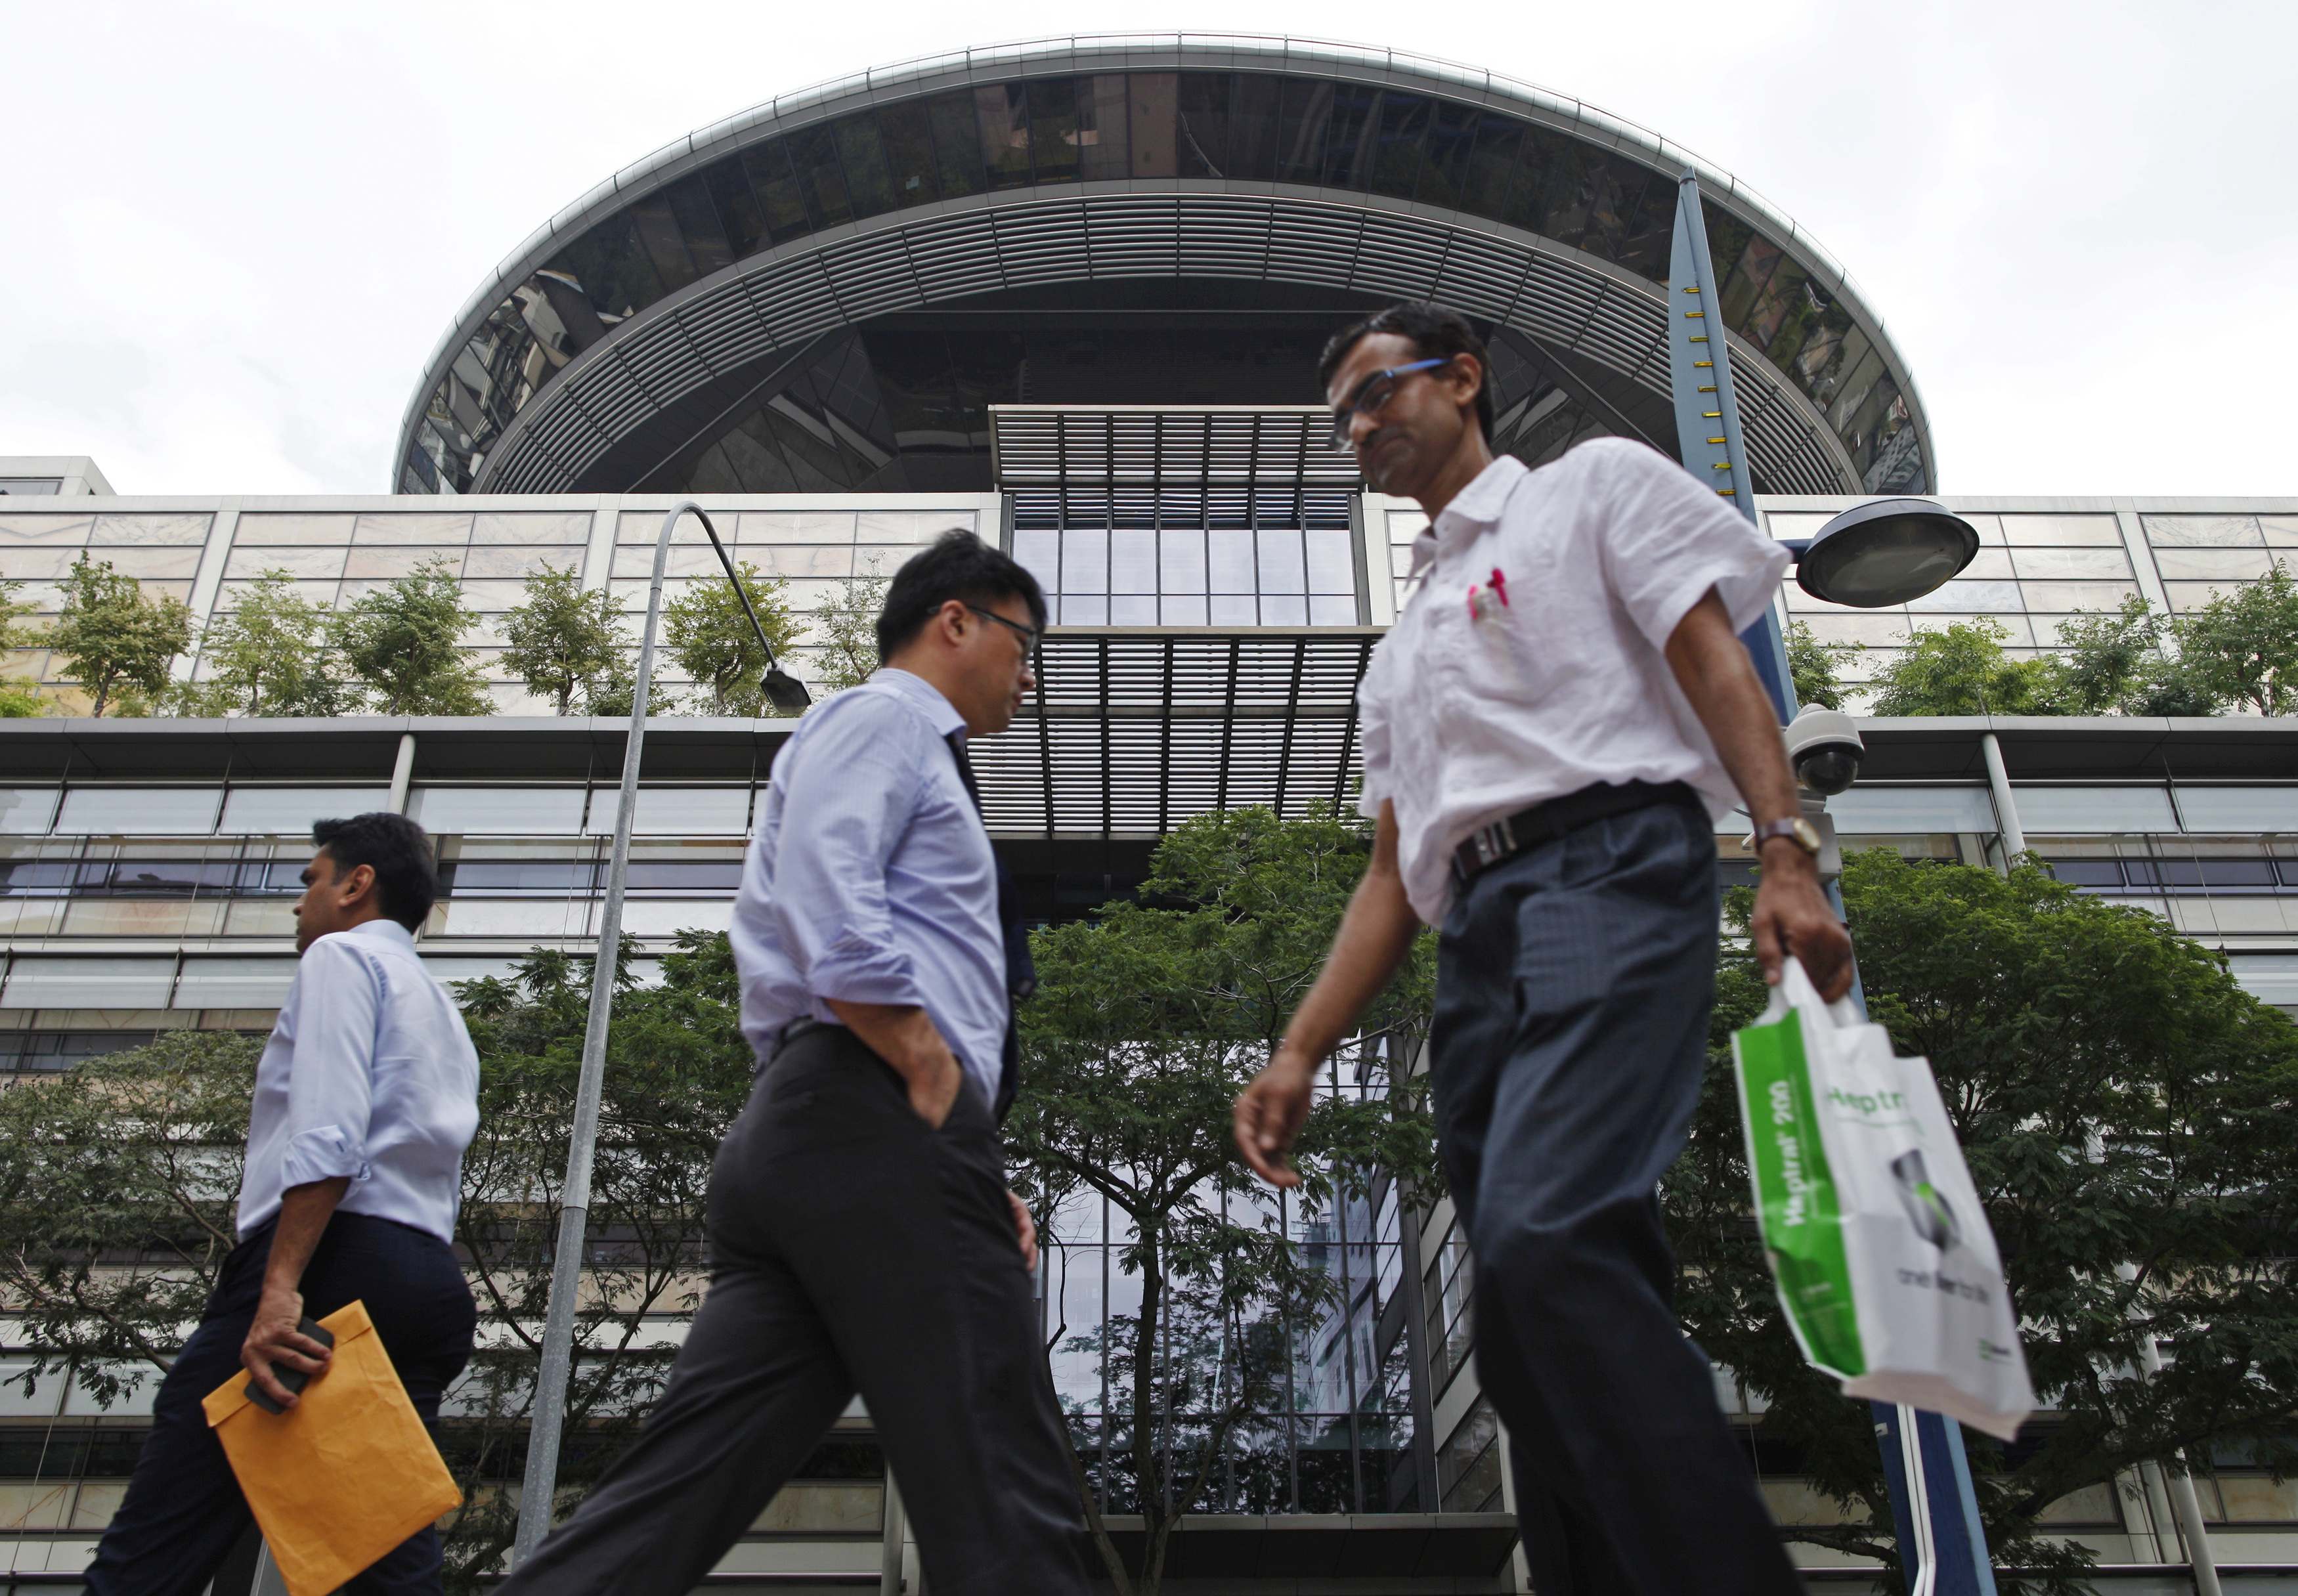 Singapore hopes to turn itself into Asia's one-stop legal city. Photo: Reuters